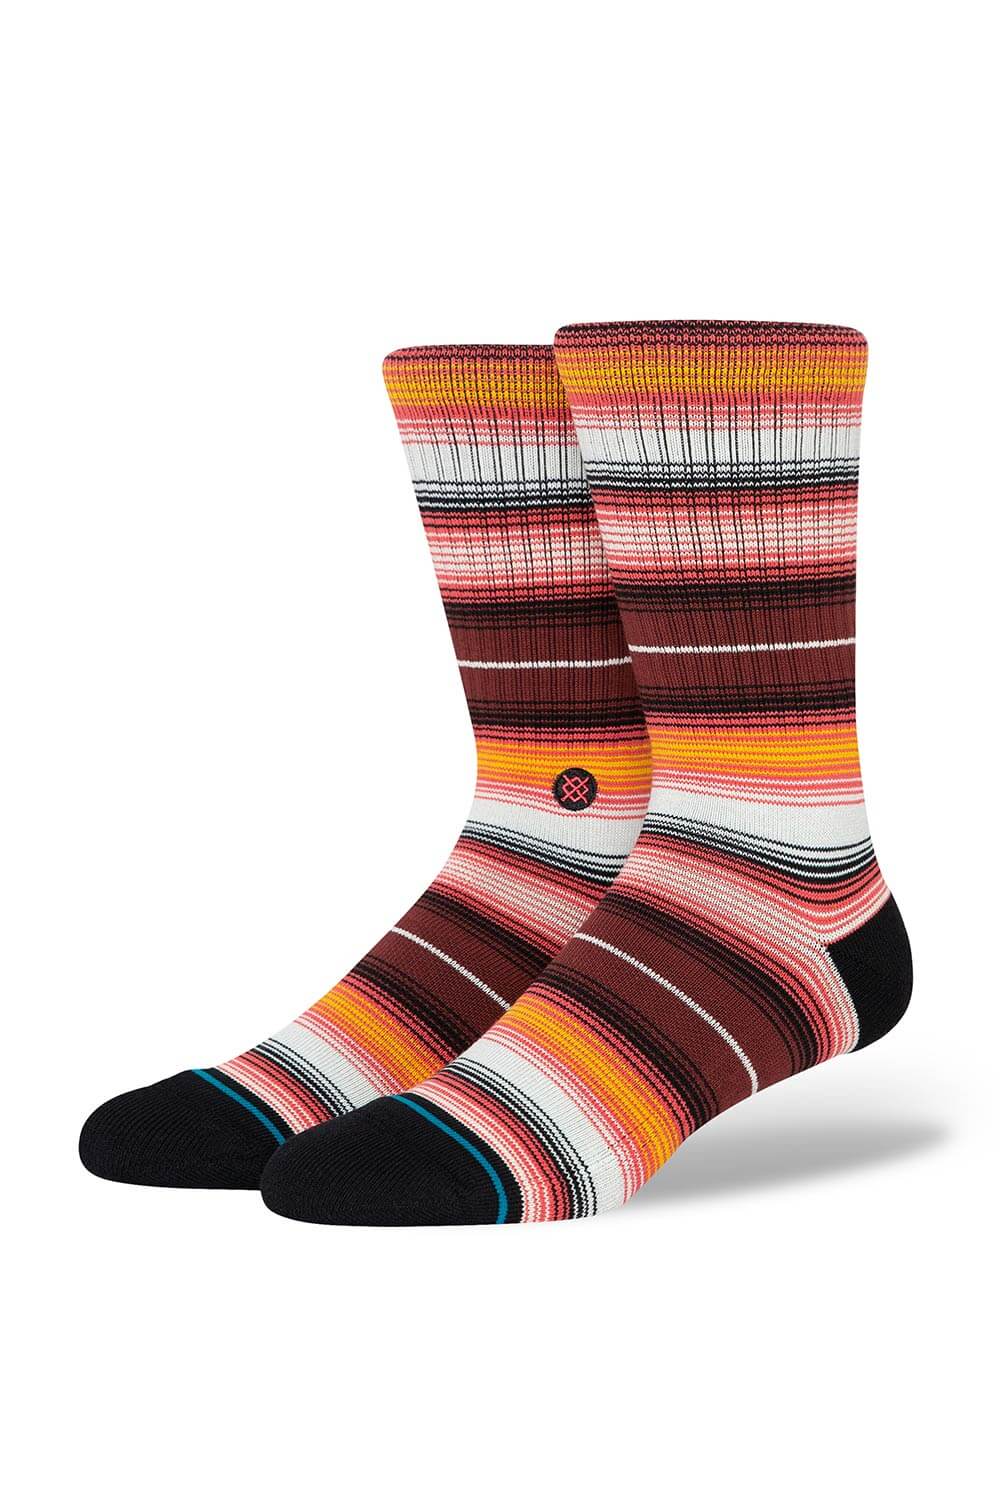 Stance Canyonland Crew Socks for Men in Multicolor